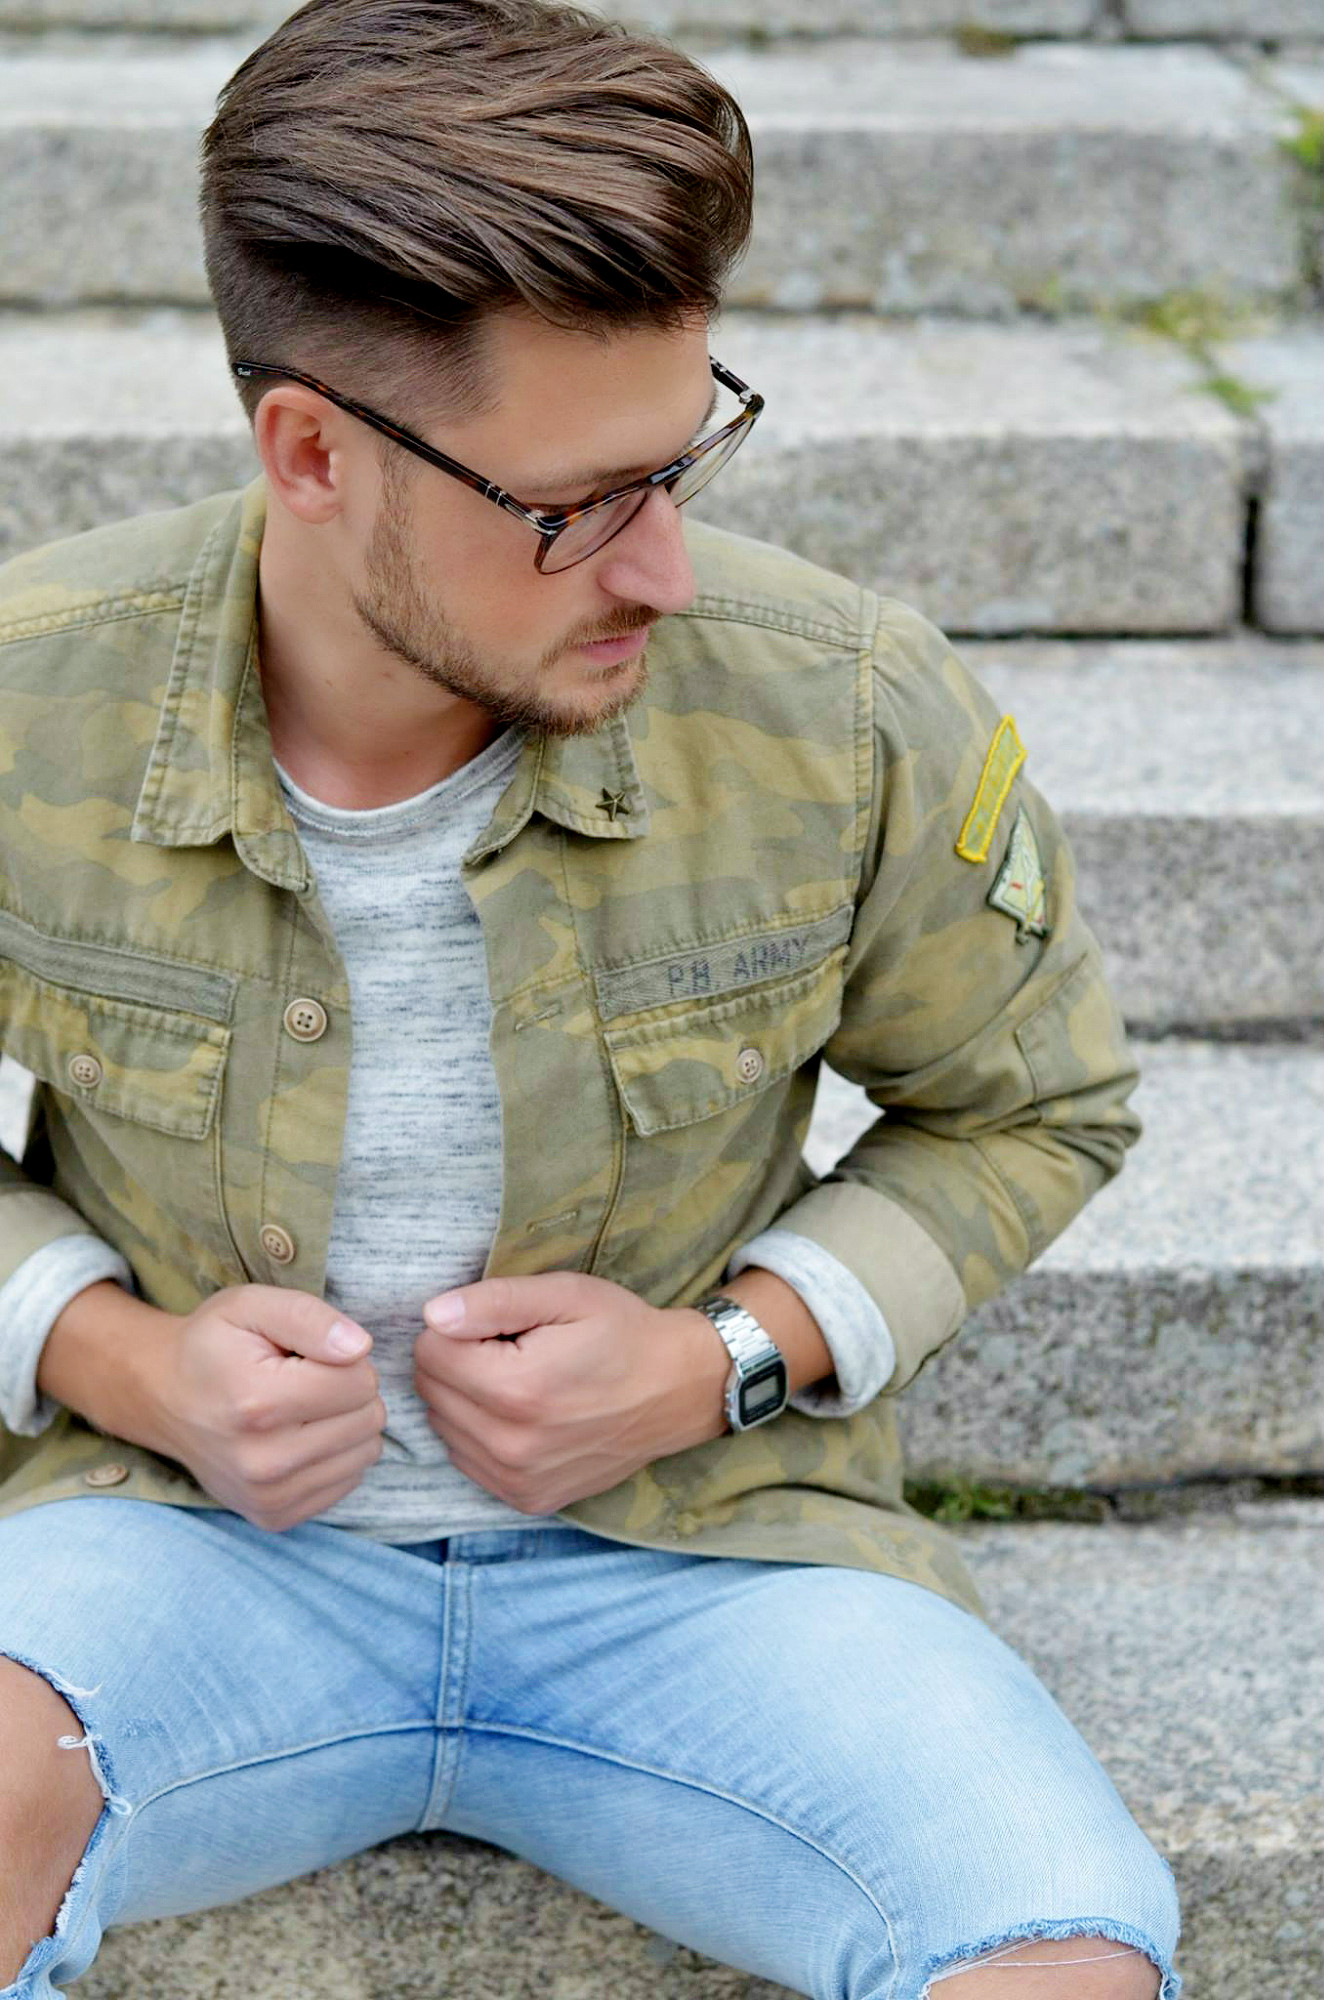 TommeezJerry-Männerblog-Berlin-Outfit-Camouflage-destroyed-Jeans-Casio-Uhr